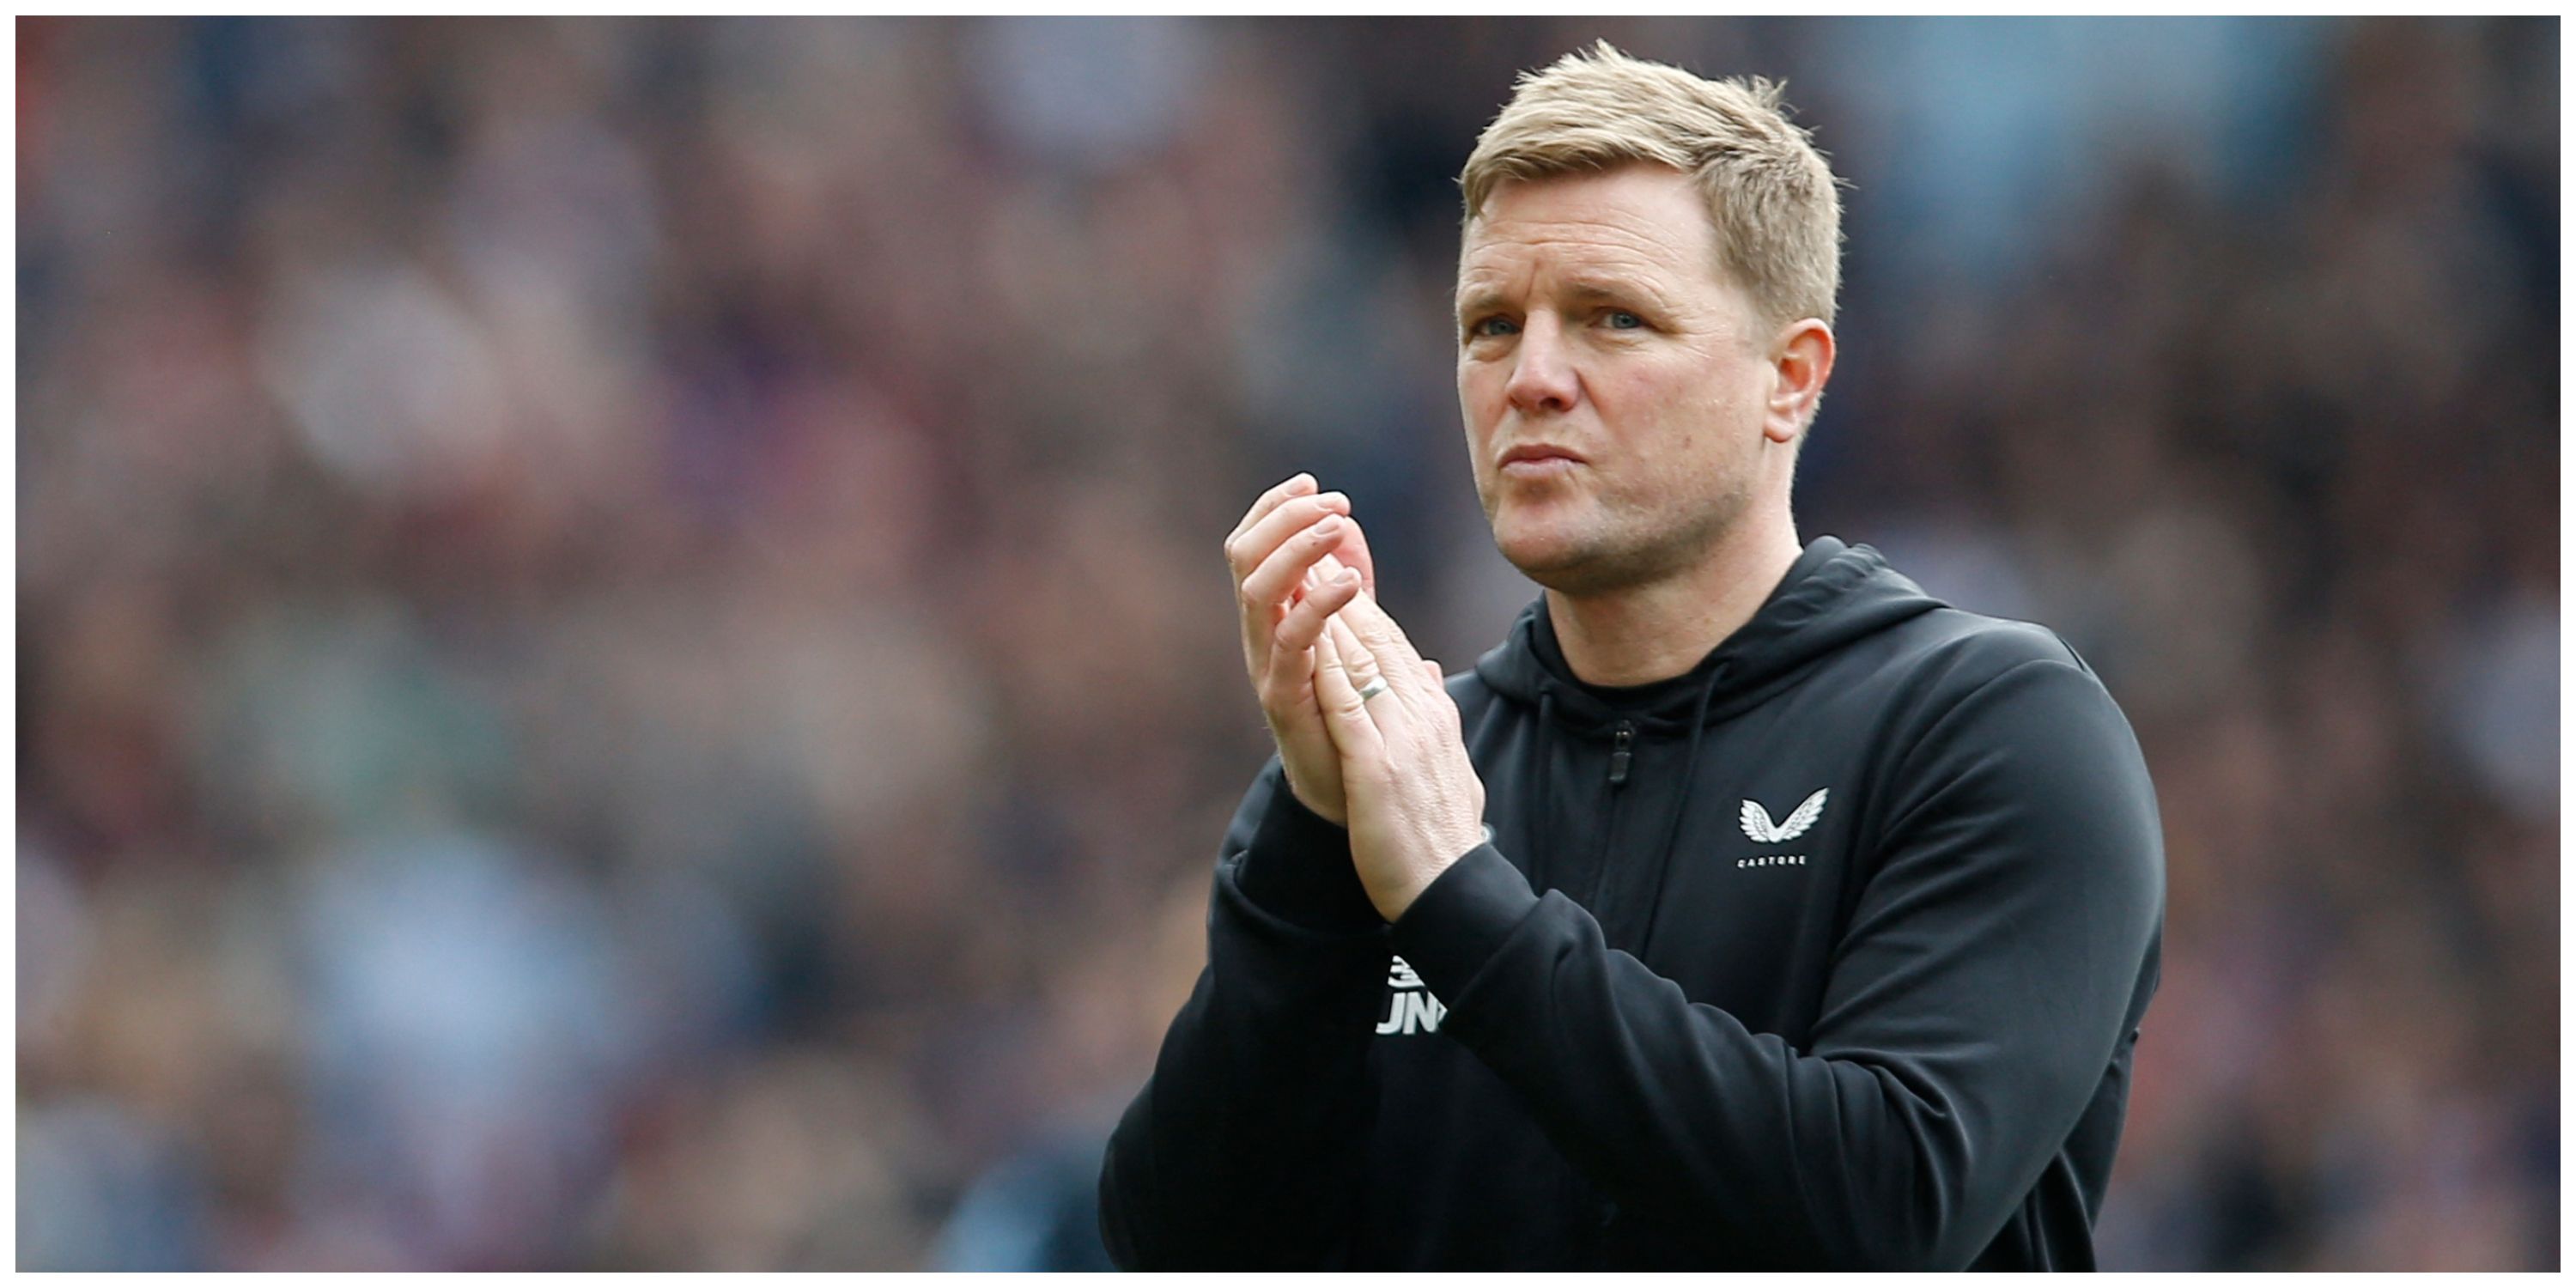 Newcastle United manager Eddie Howe disappointed after defeat